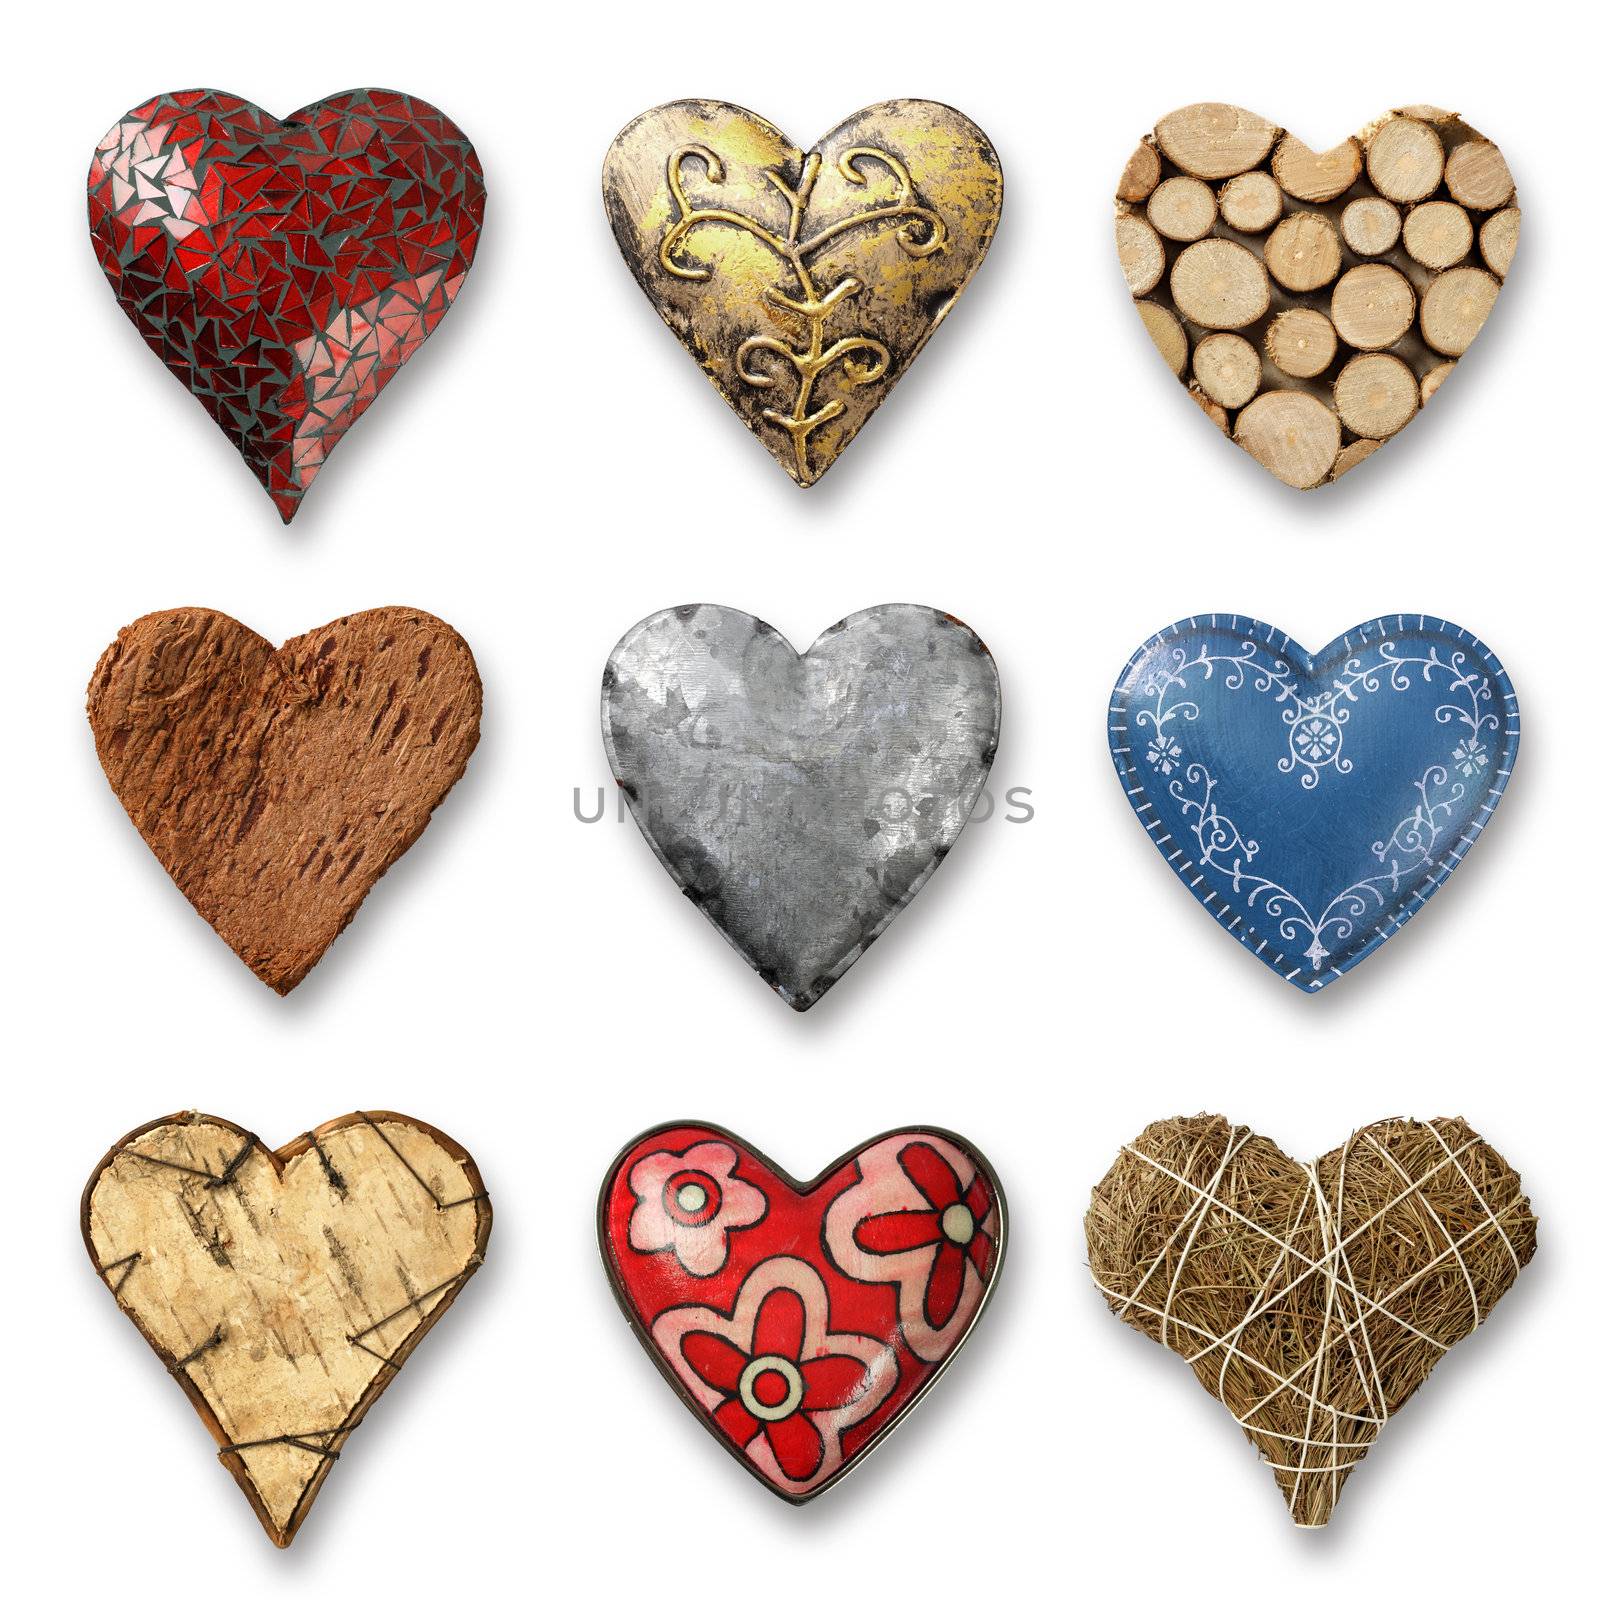 Assortment of hearts by sumners